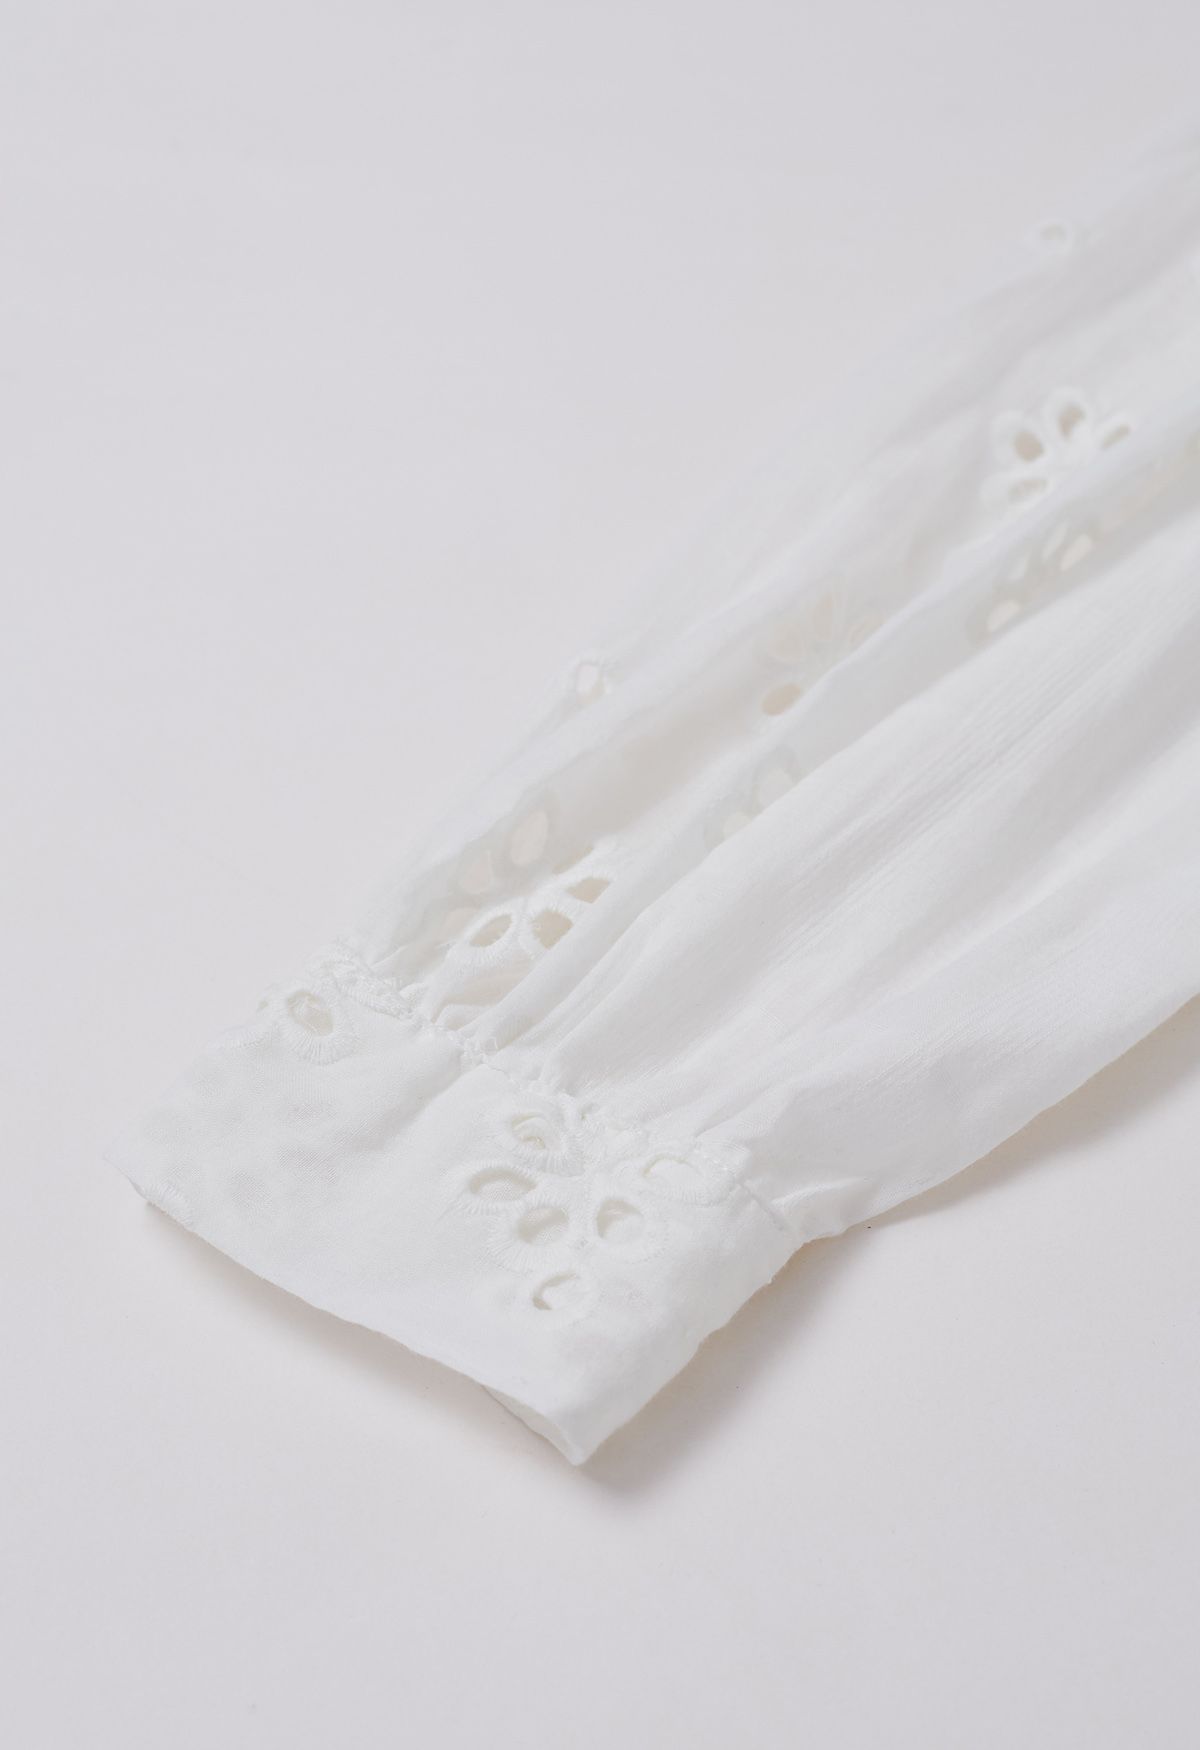 Daisy Eyelet Embroidery Cotton Top in White